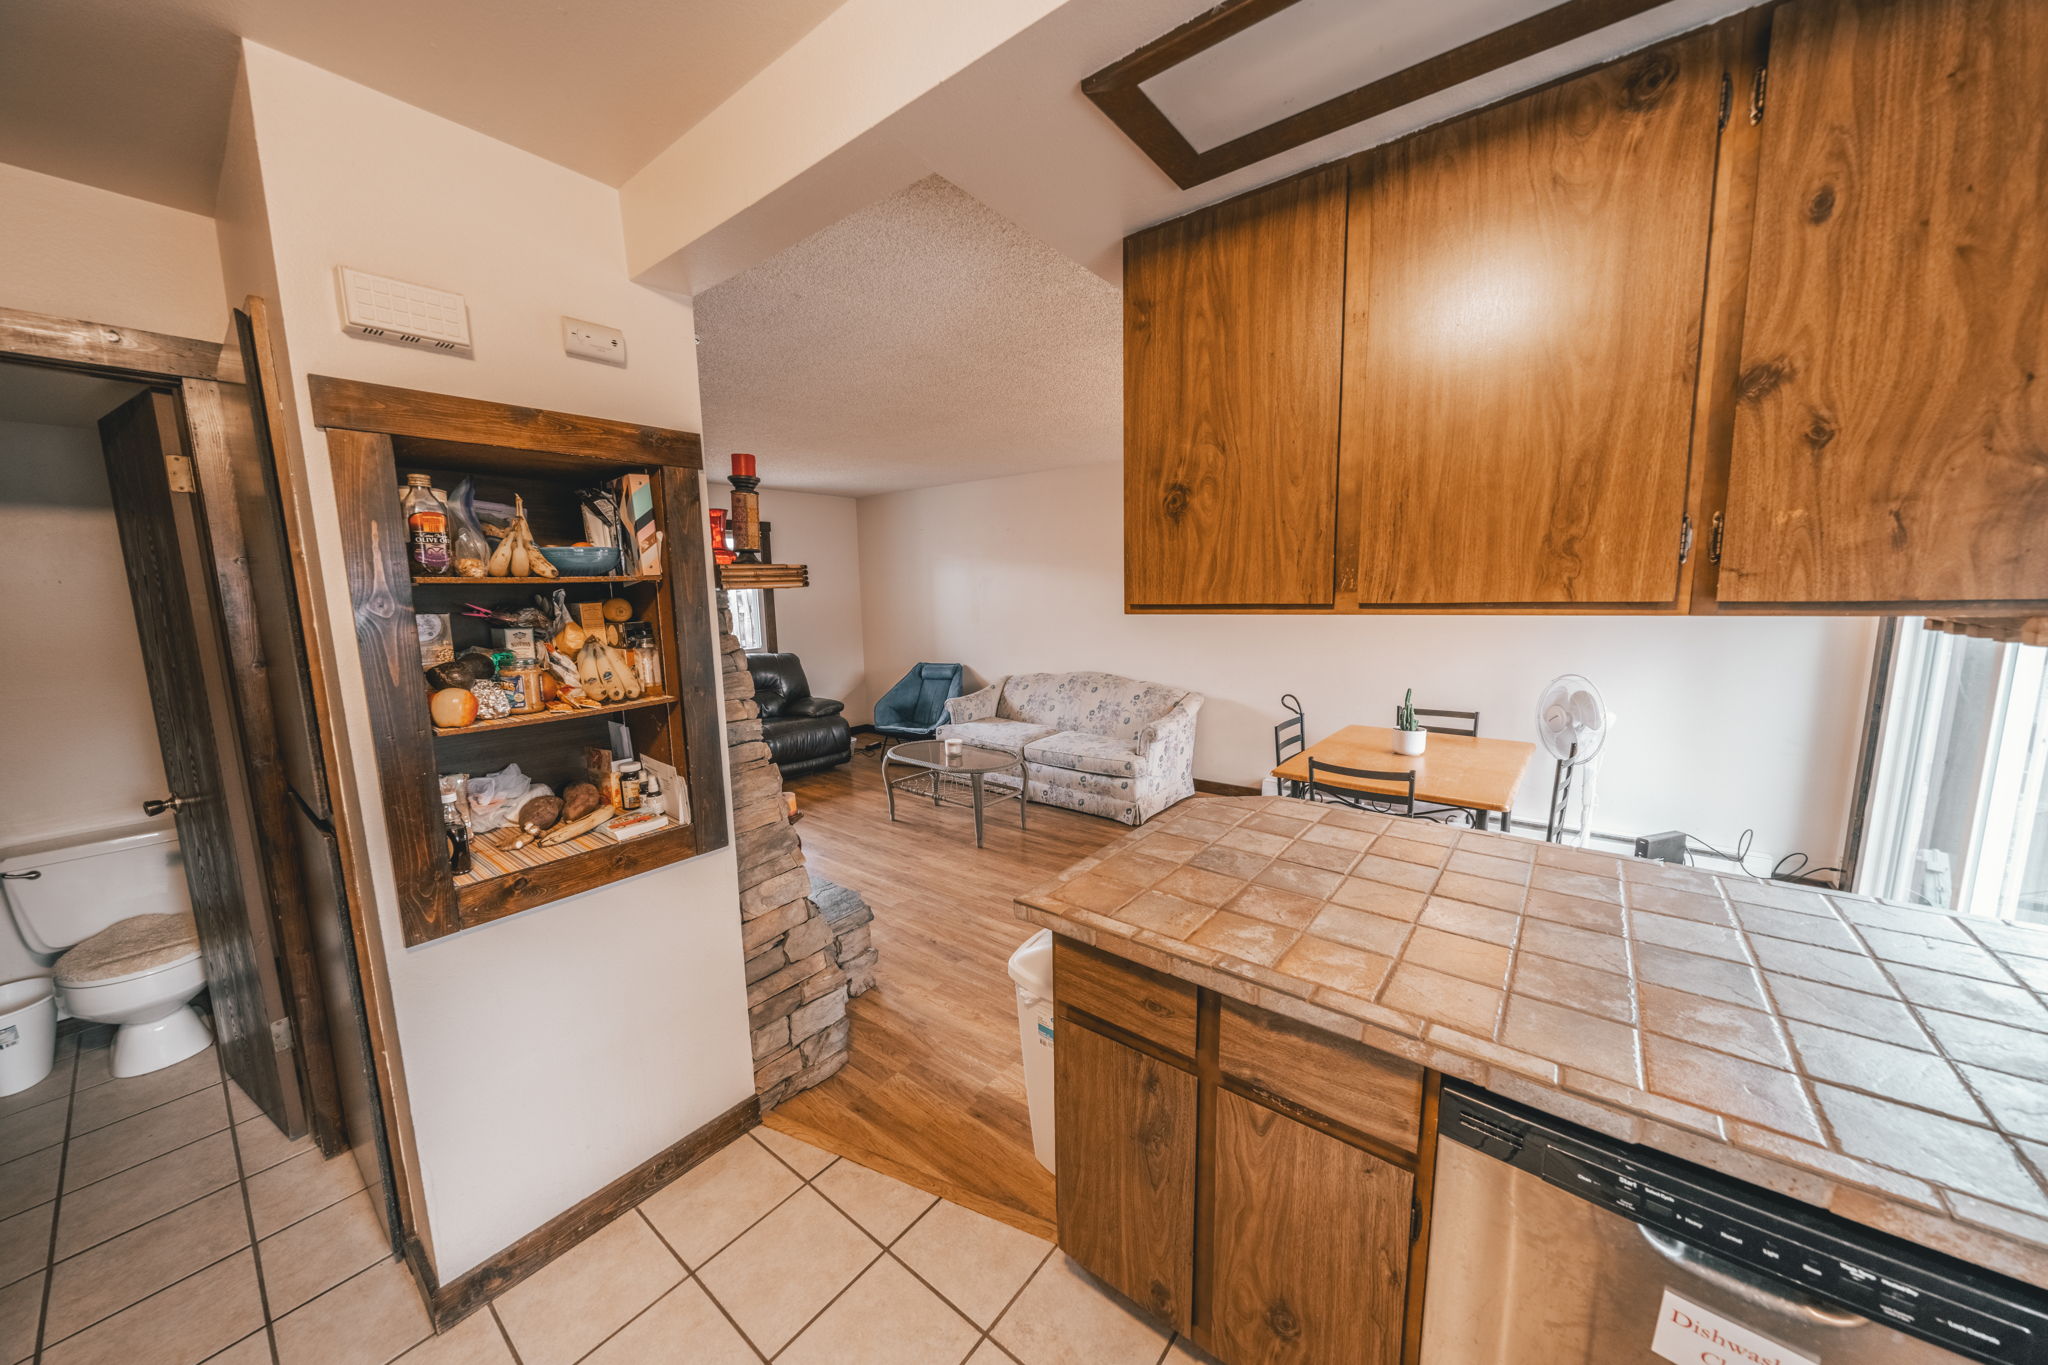  3029 Ross Dr Y-9, Fort Collins, CO 80526, US Photo 16